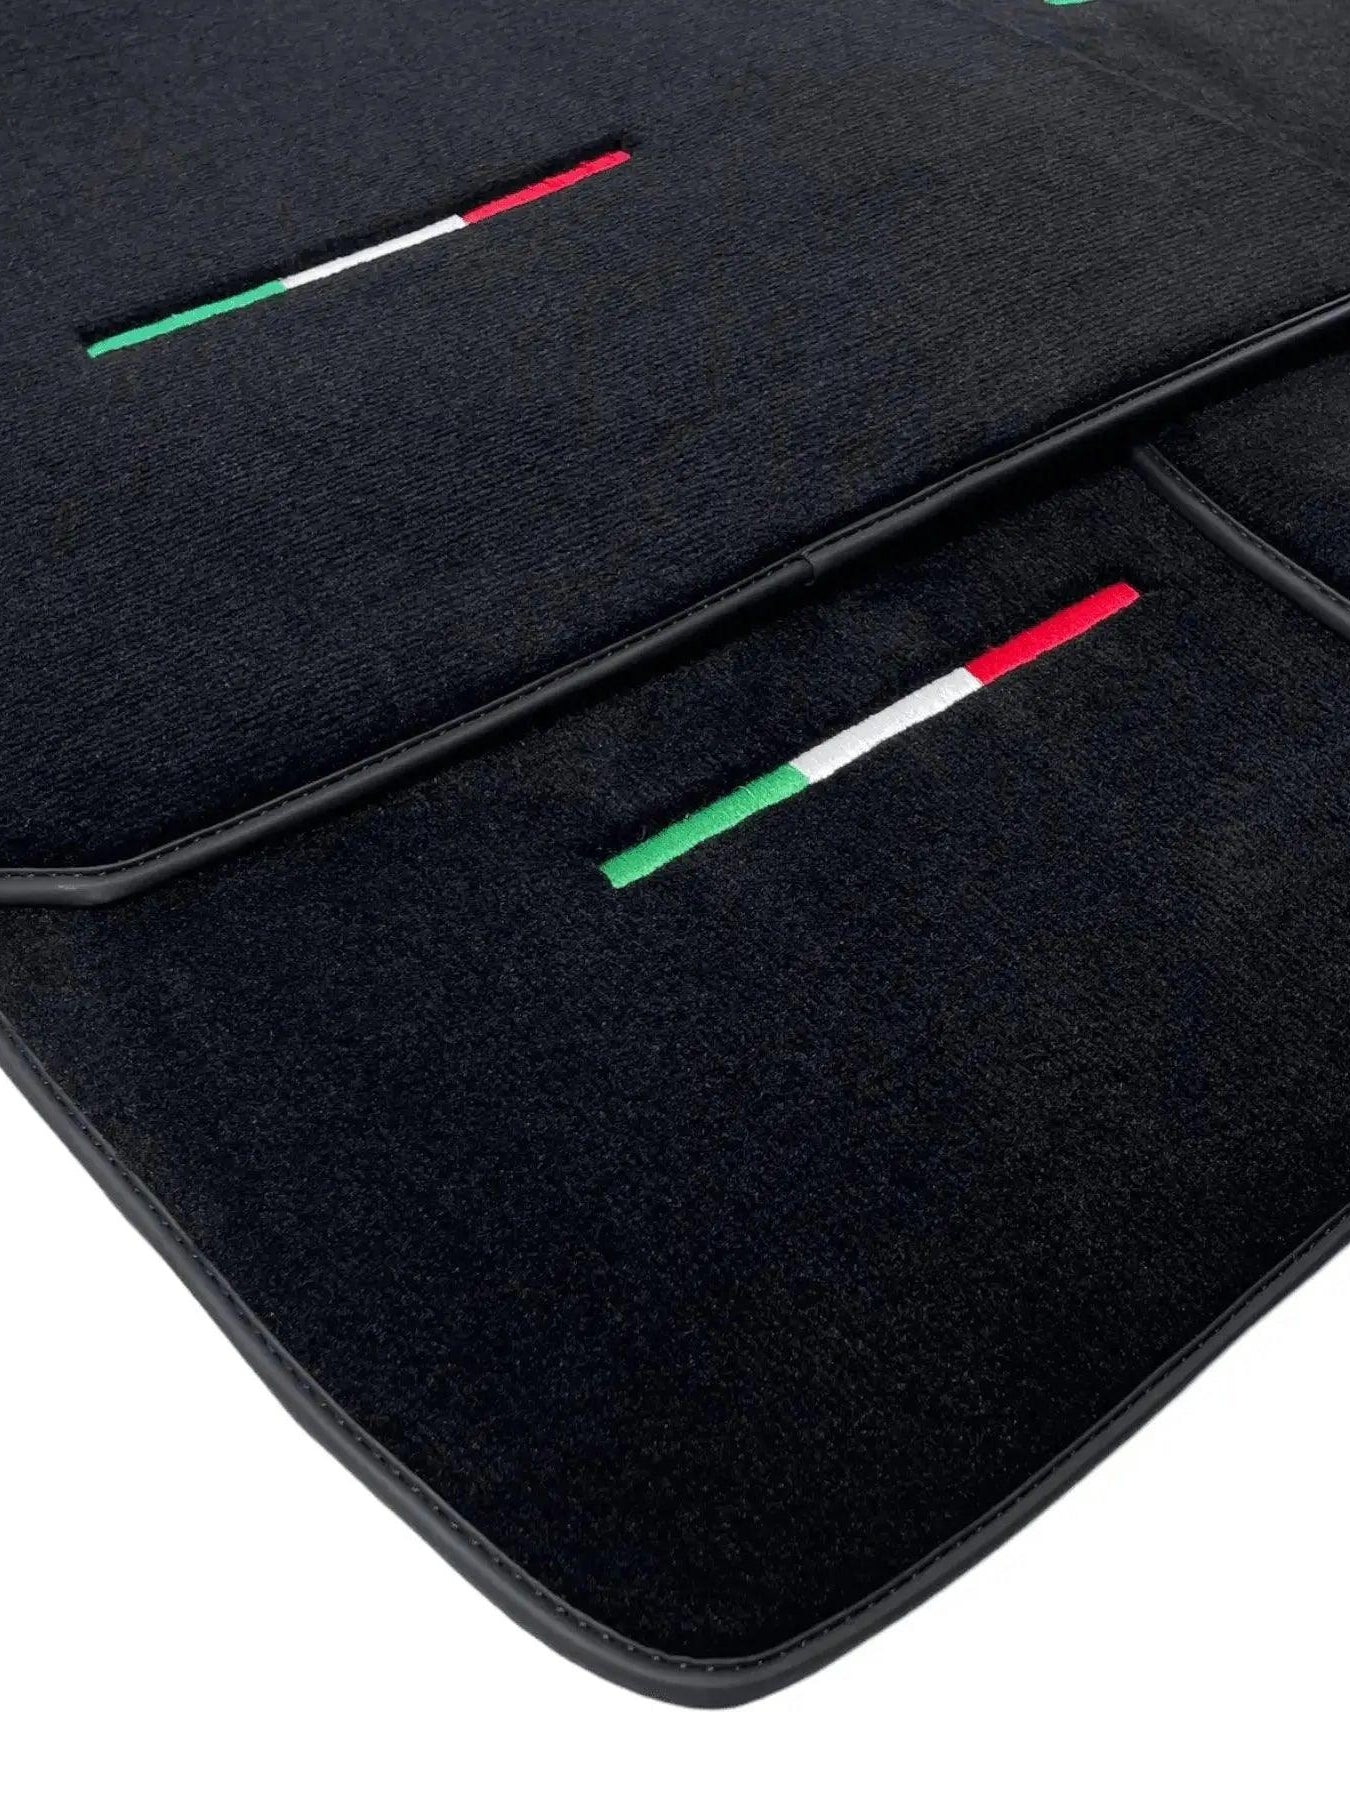 Black Floor Mats For Maserati Coupé (2001-2007) Italy Edition - AutoWin